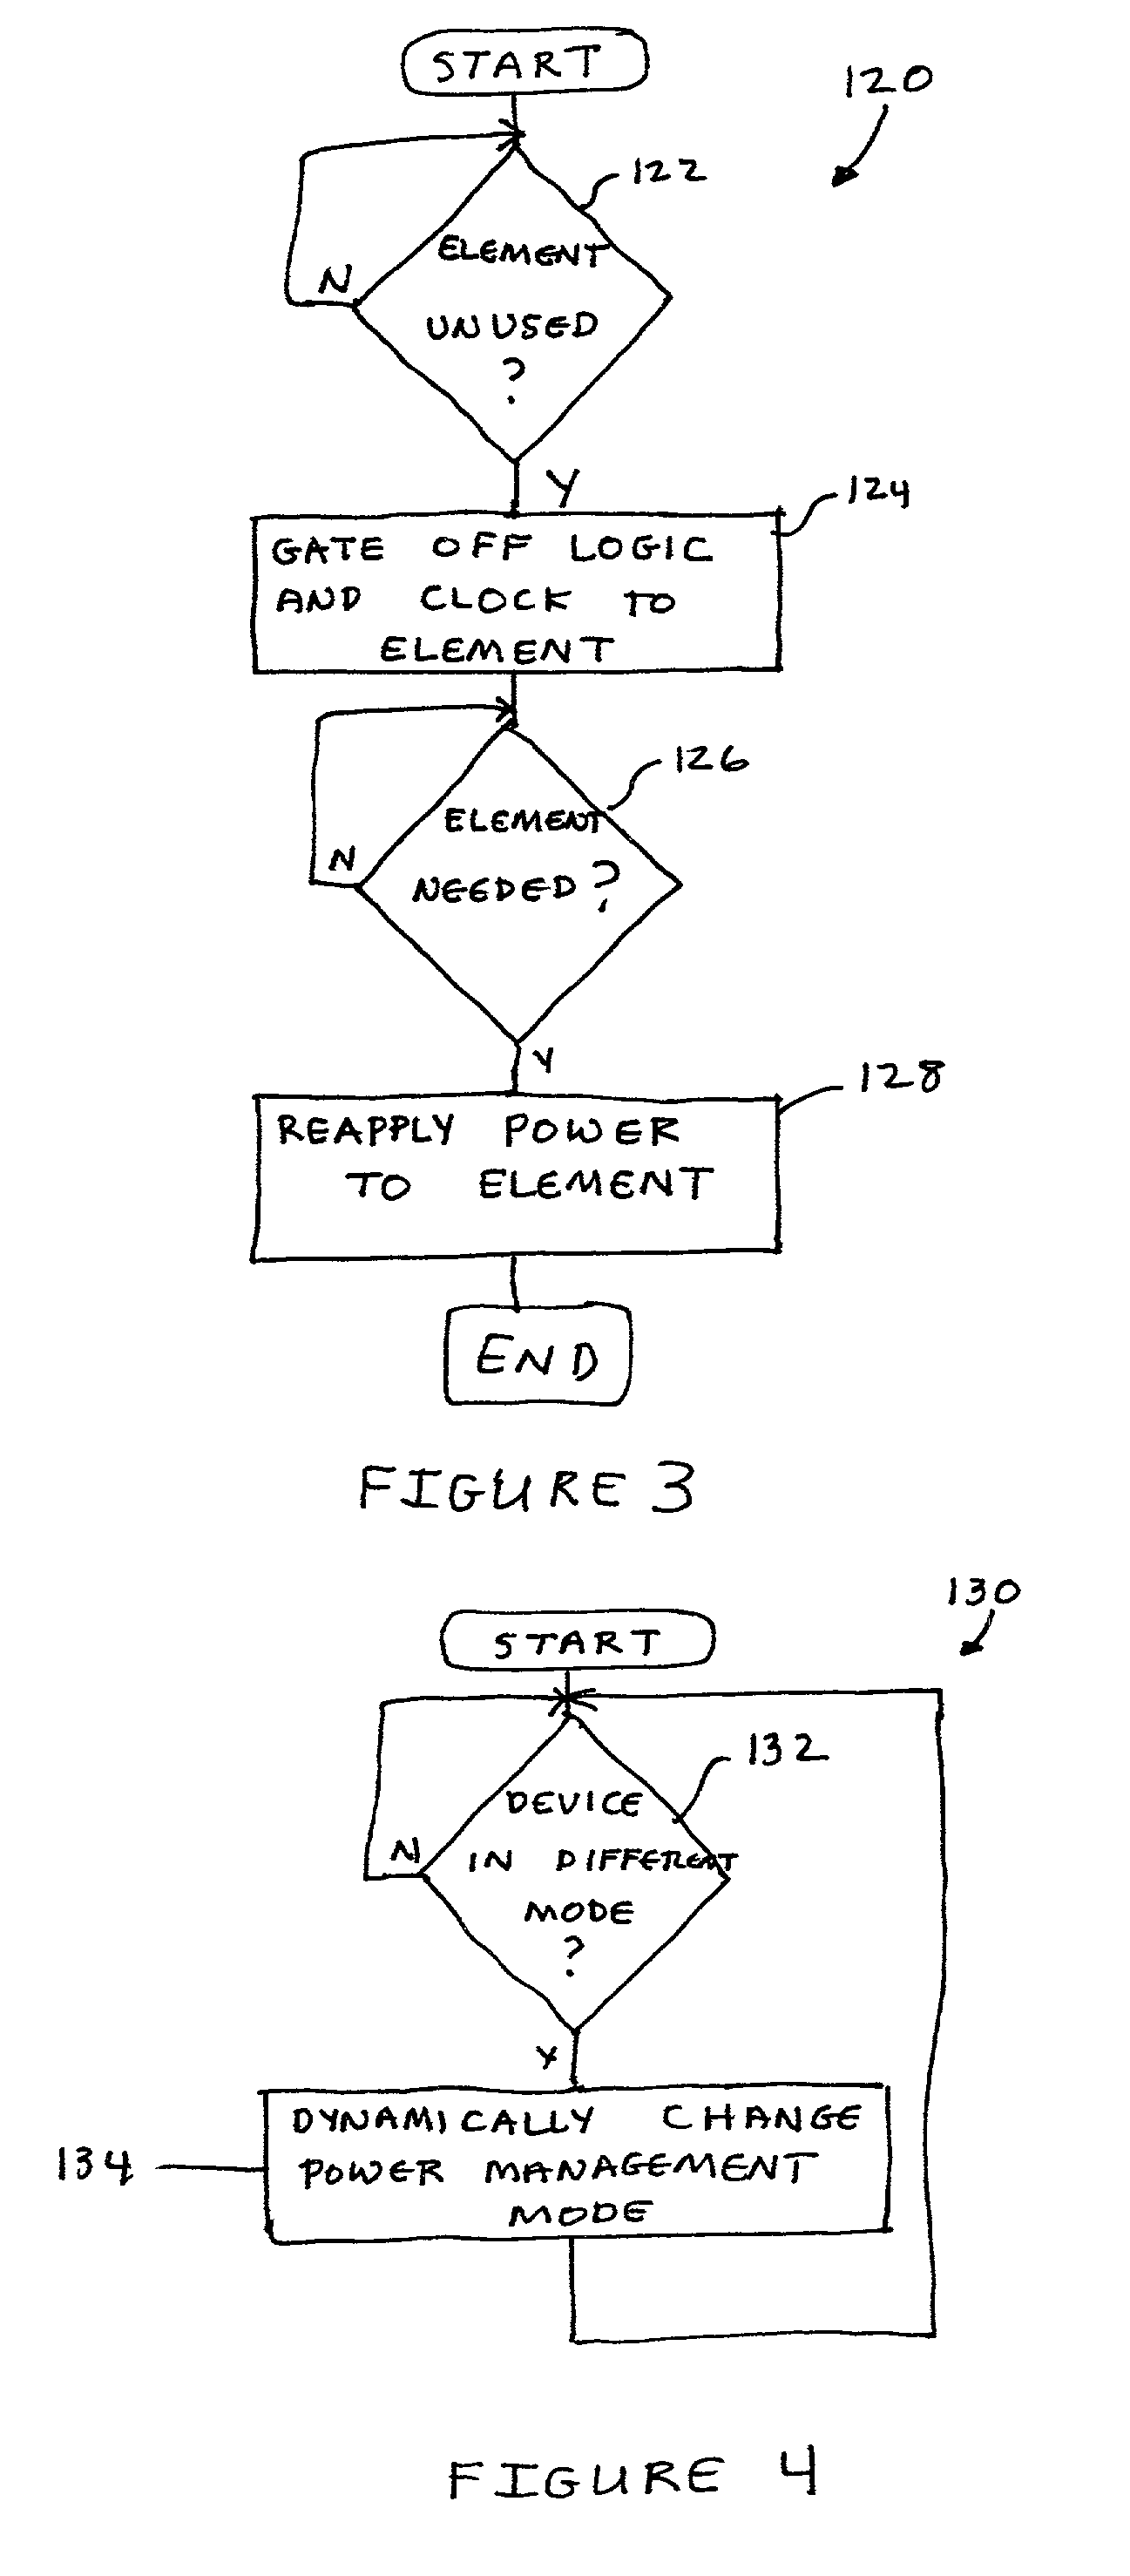 Dynamic power management of devices in computer system by selecting clock generator output based on a current state and programmable policies